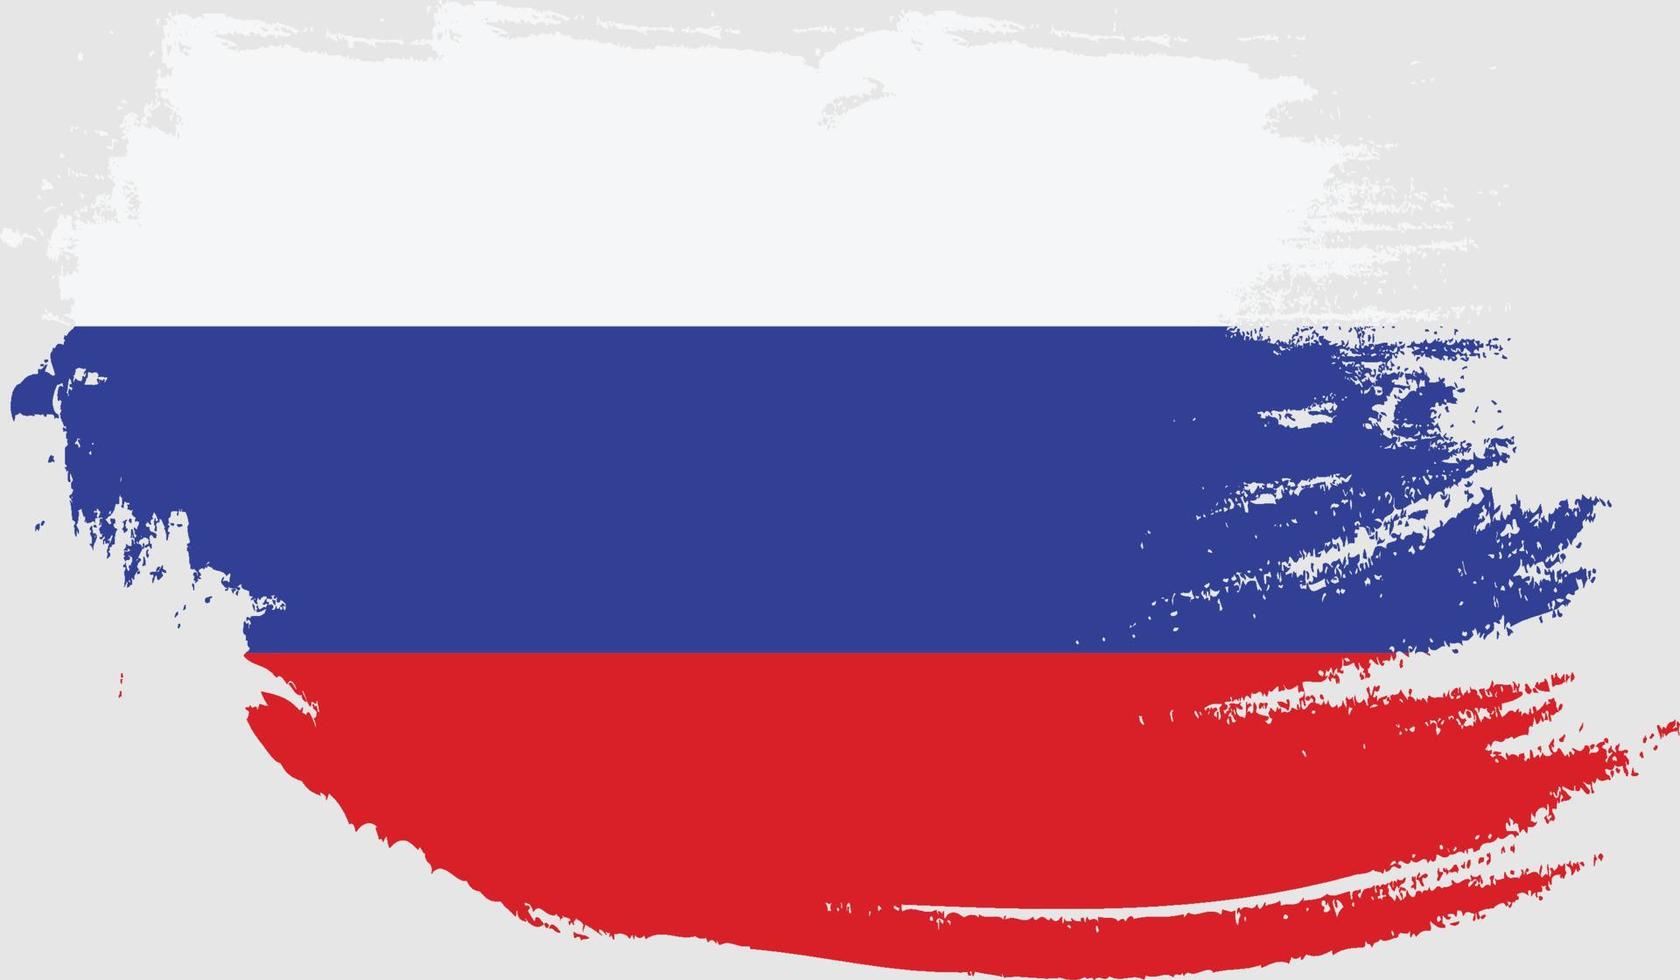 Russia flag with grunge texture vector